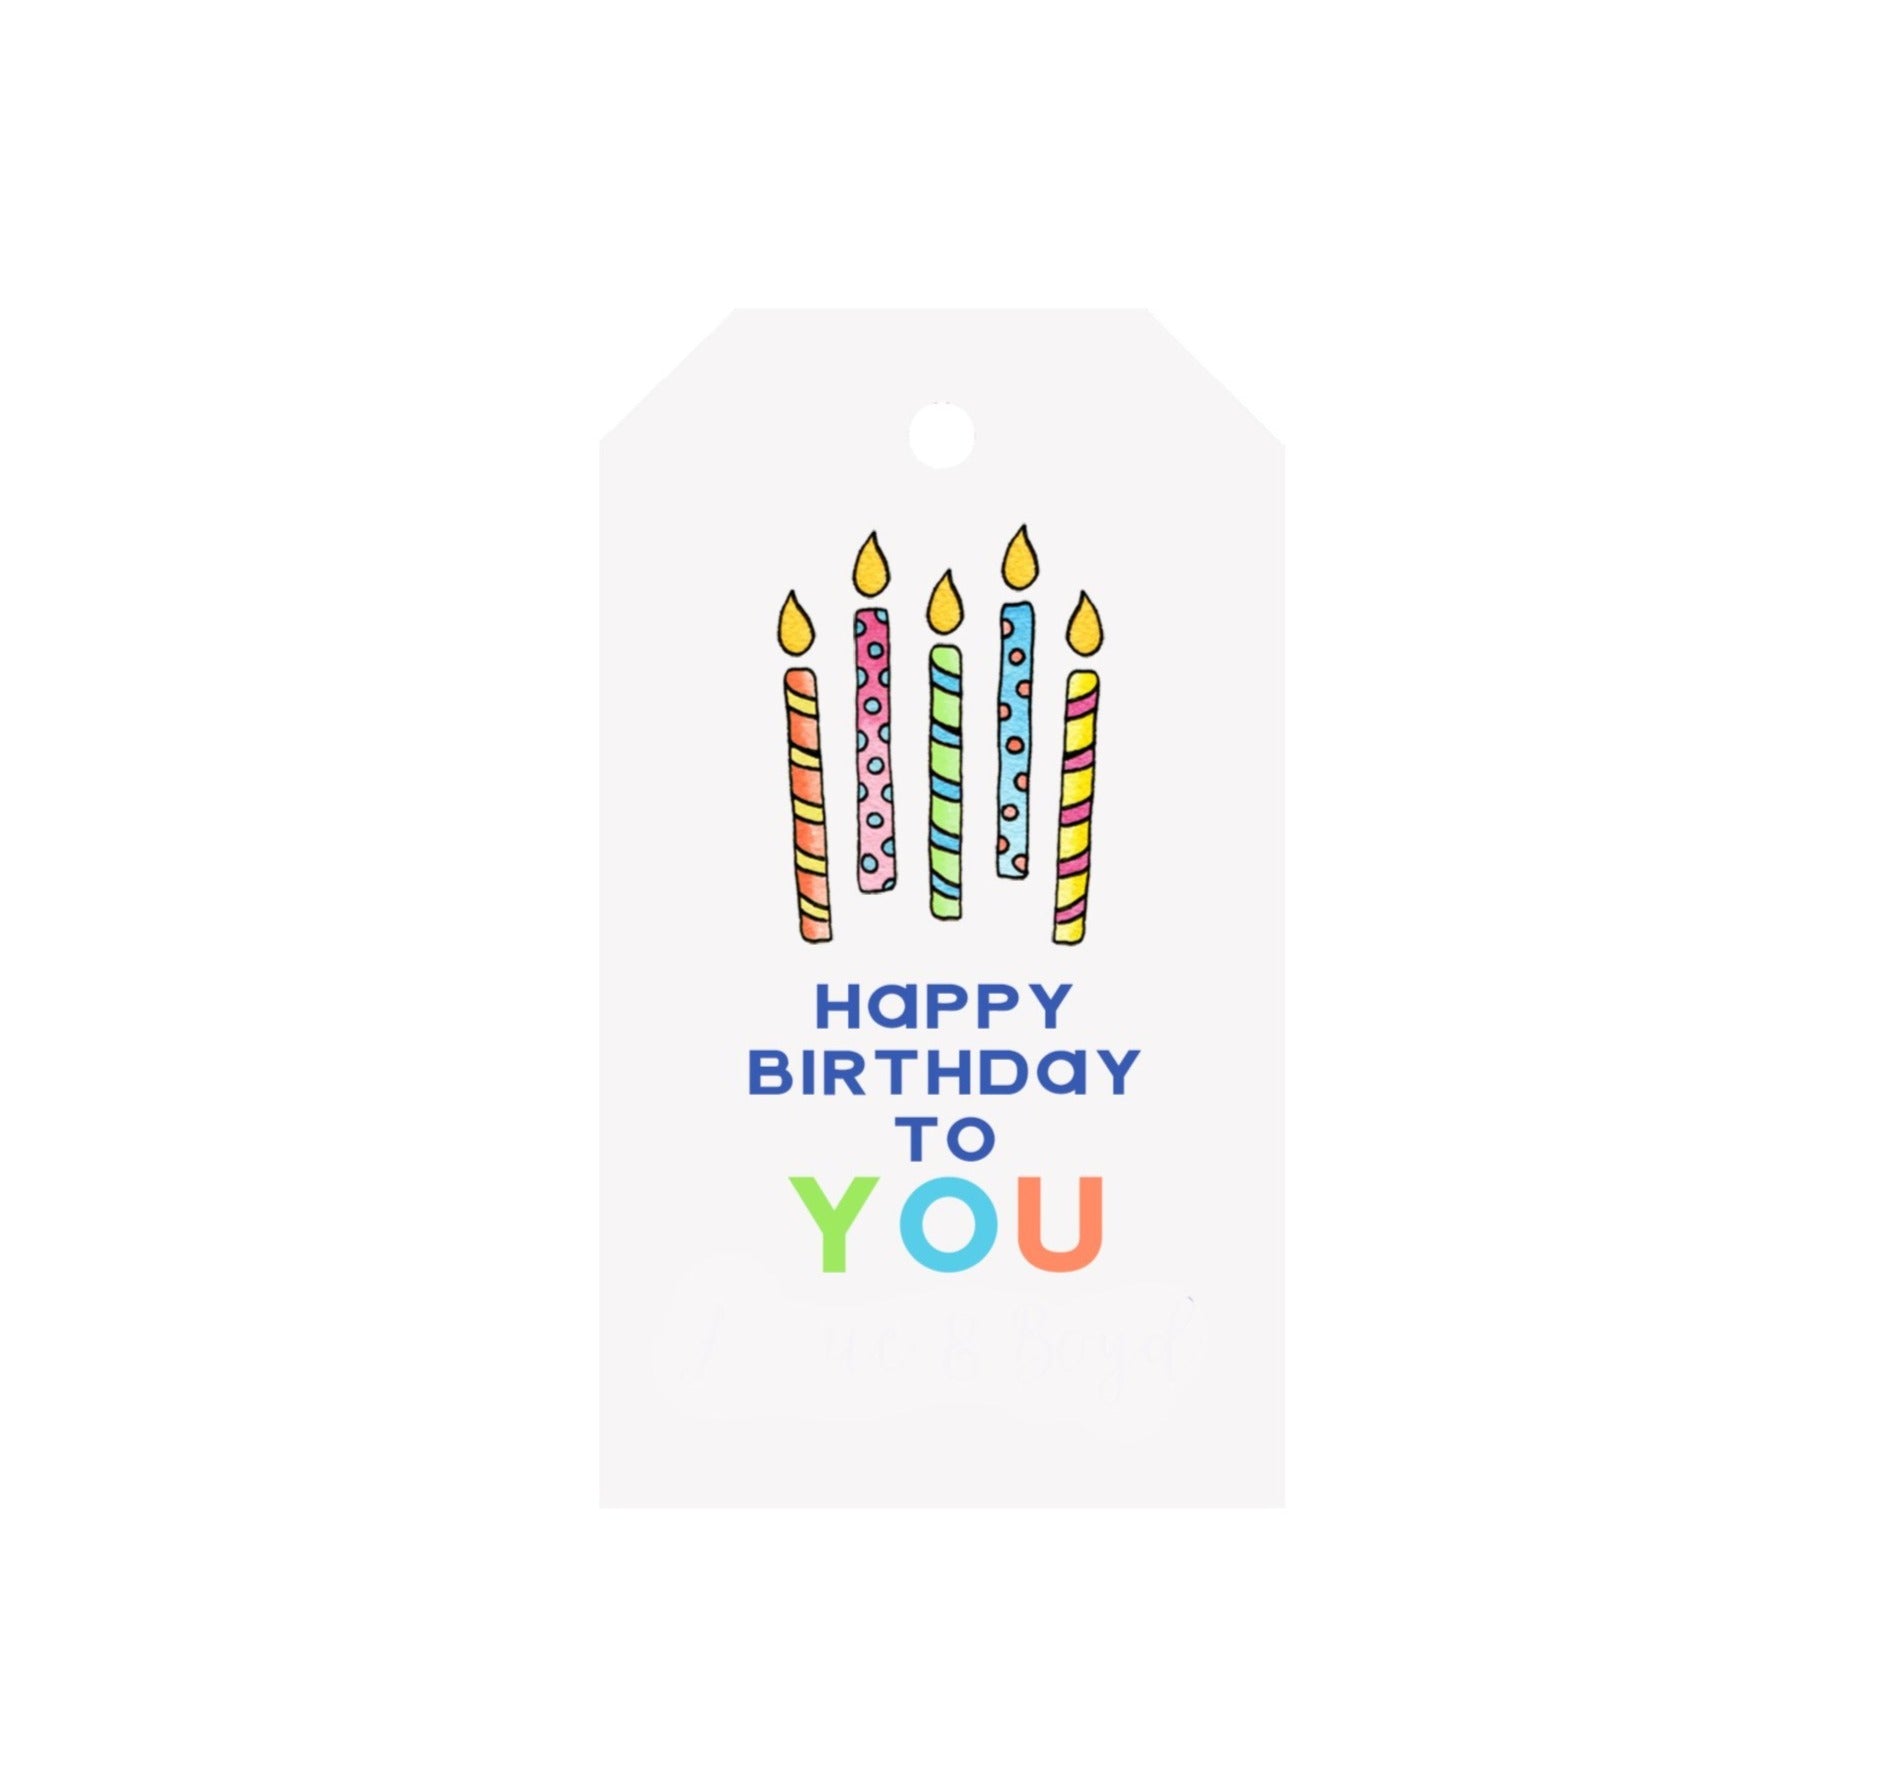 Birthday Candles Luggage Gift Tags